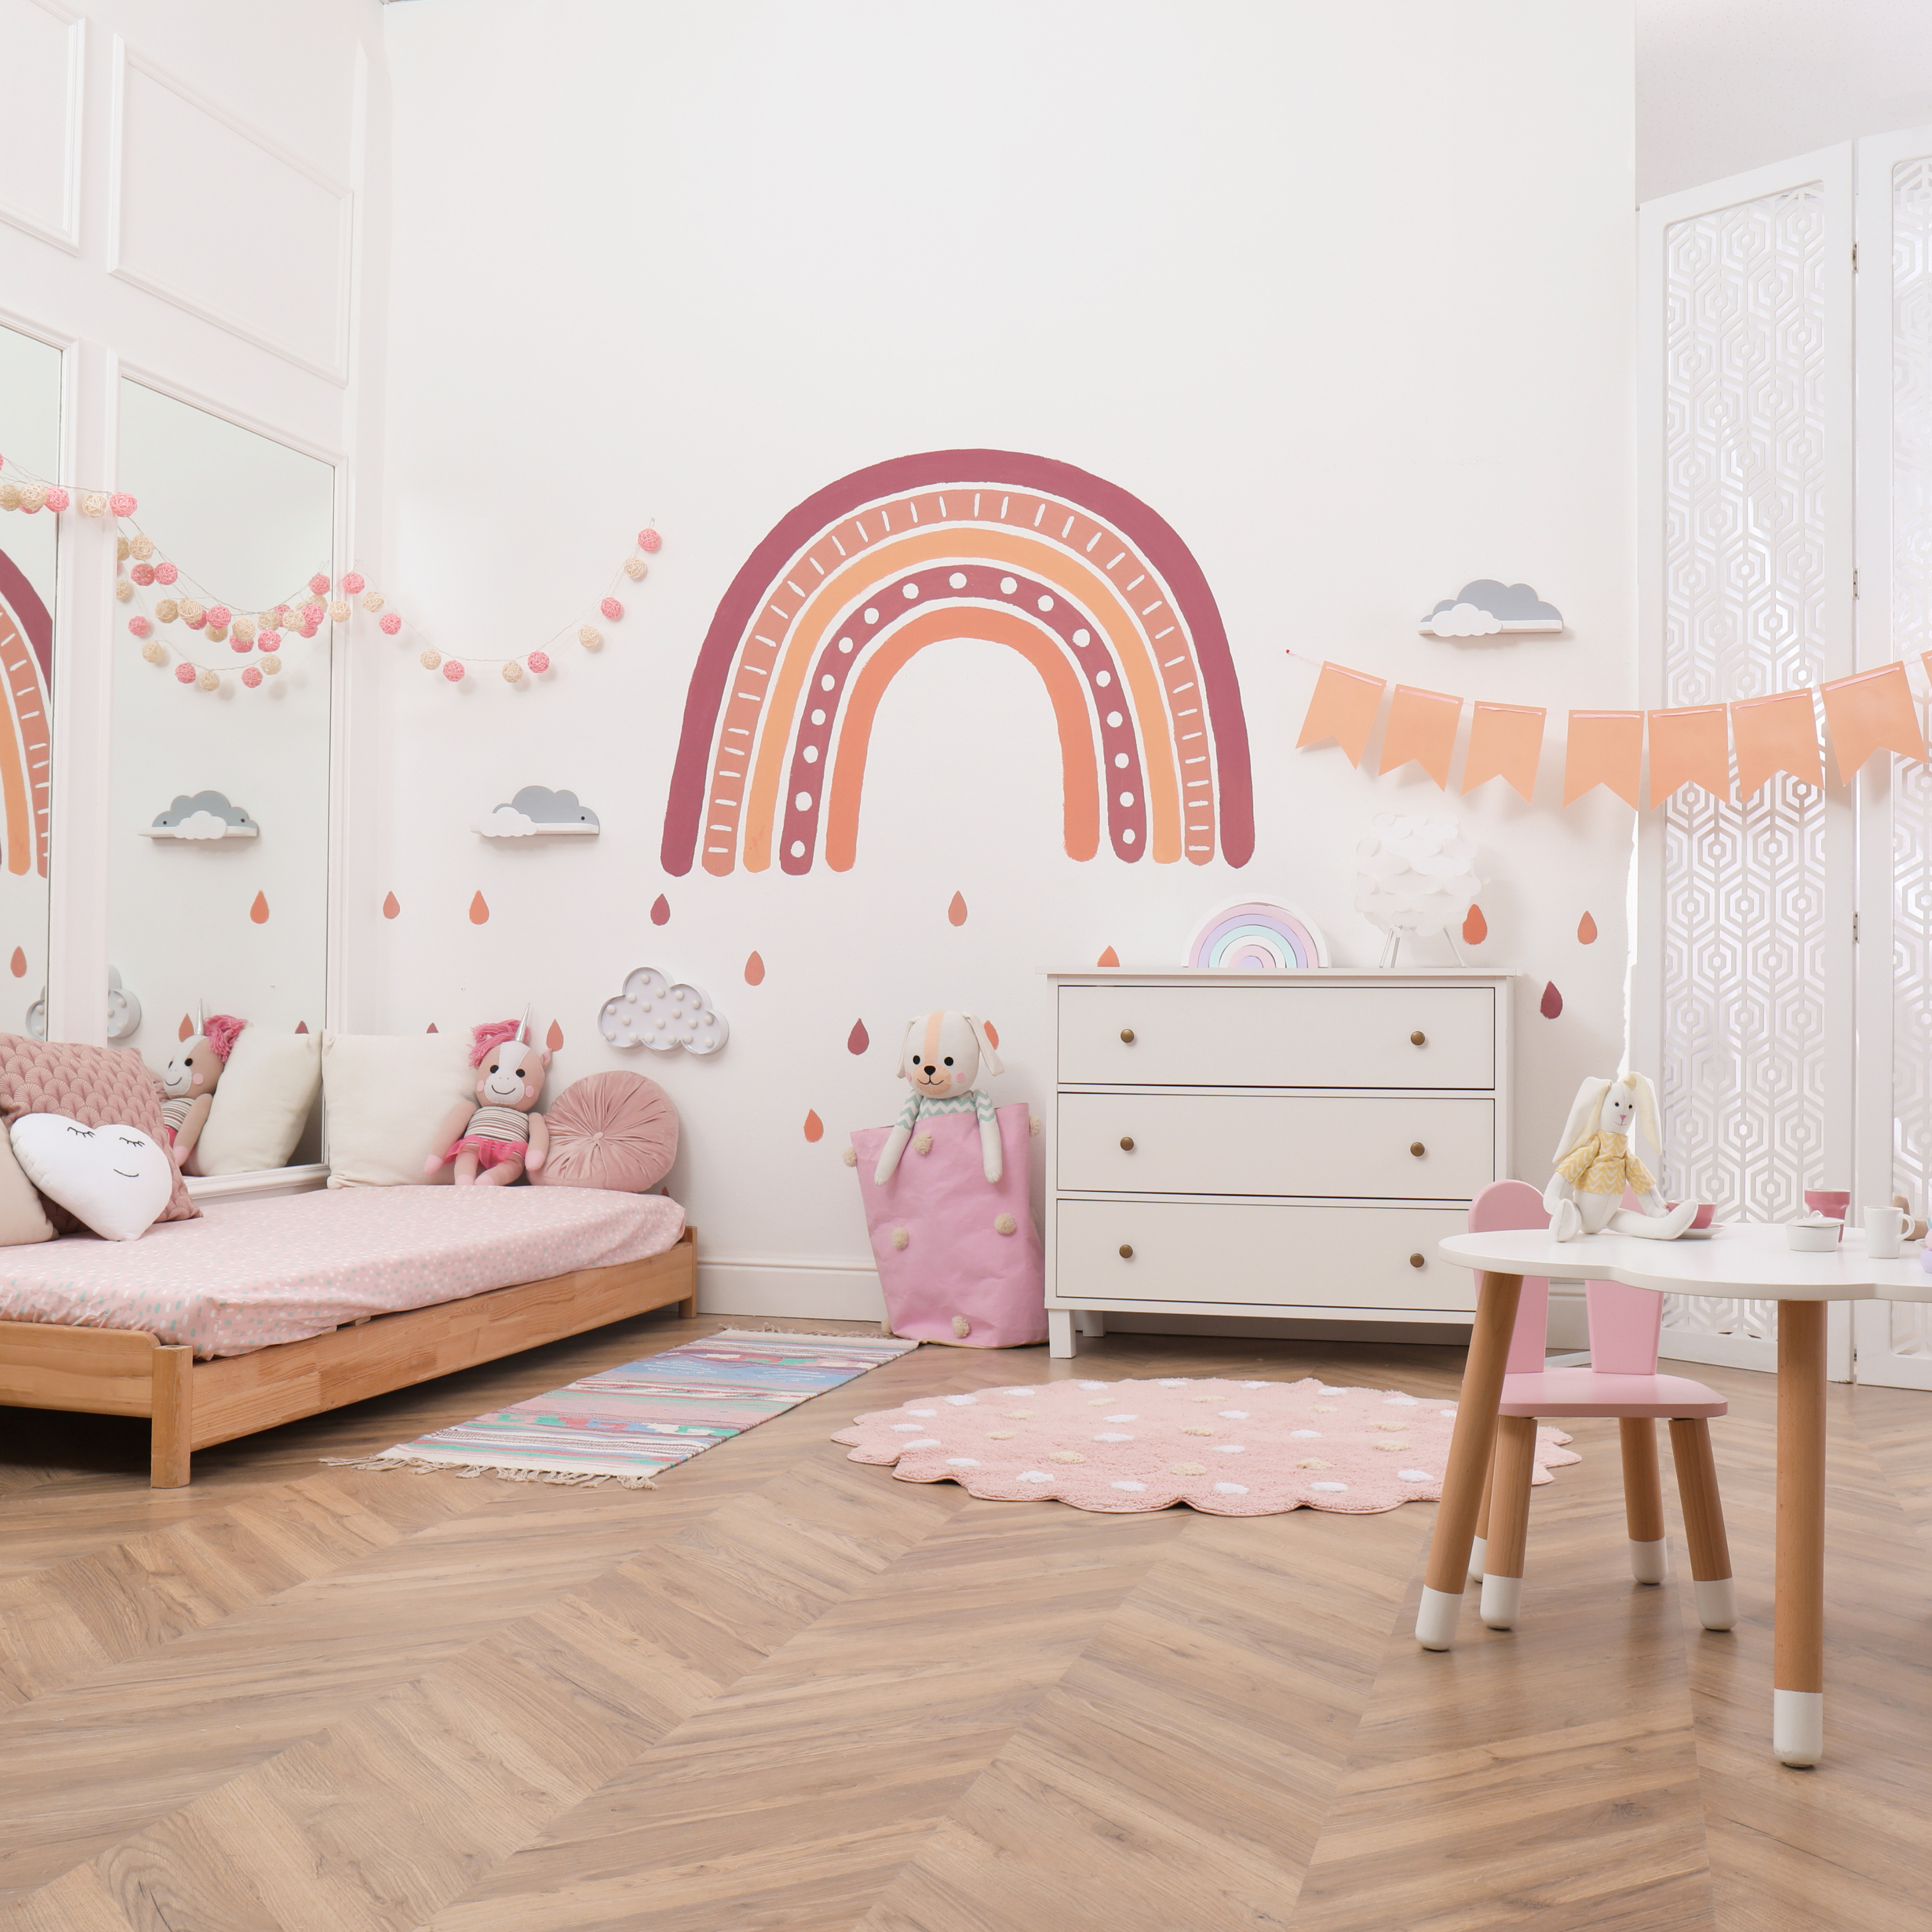 Setting Up Your Montessori-Inspired Bedroom